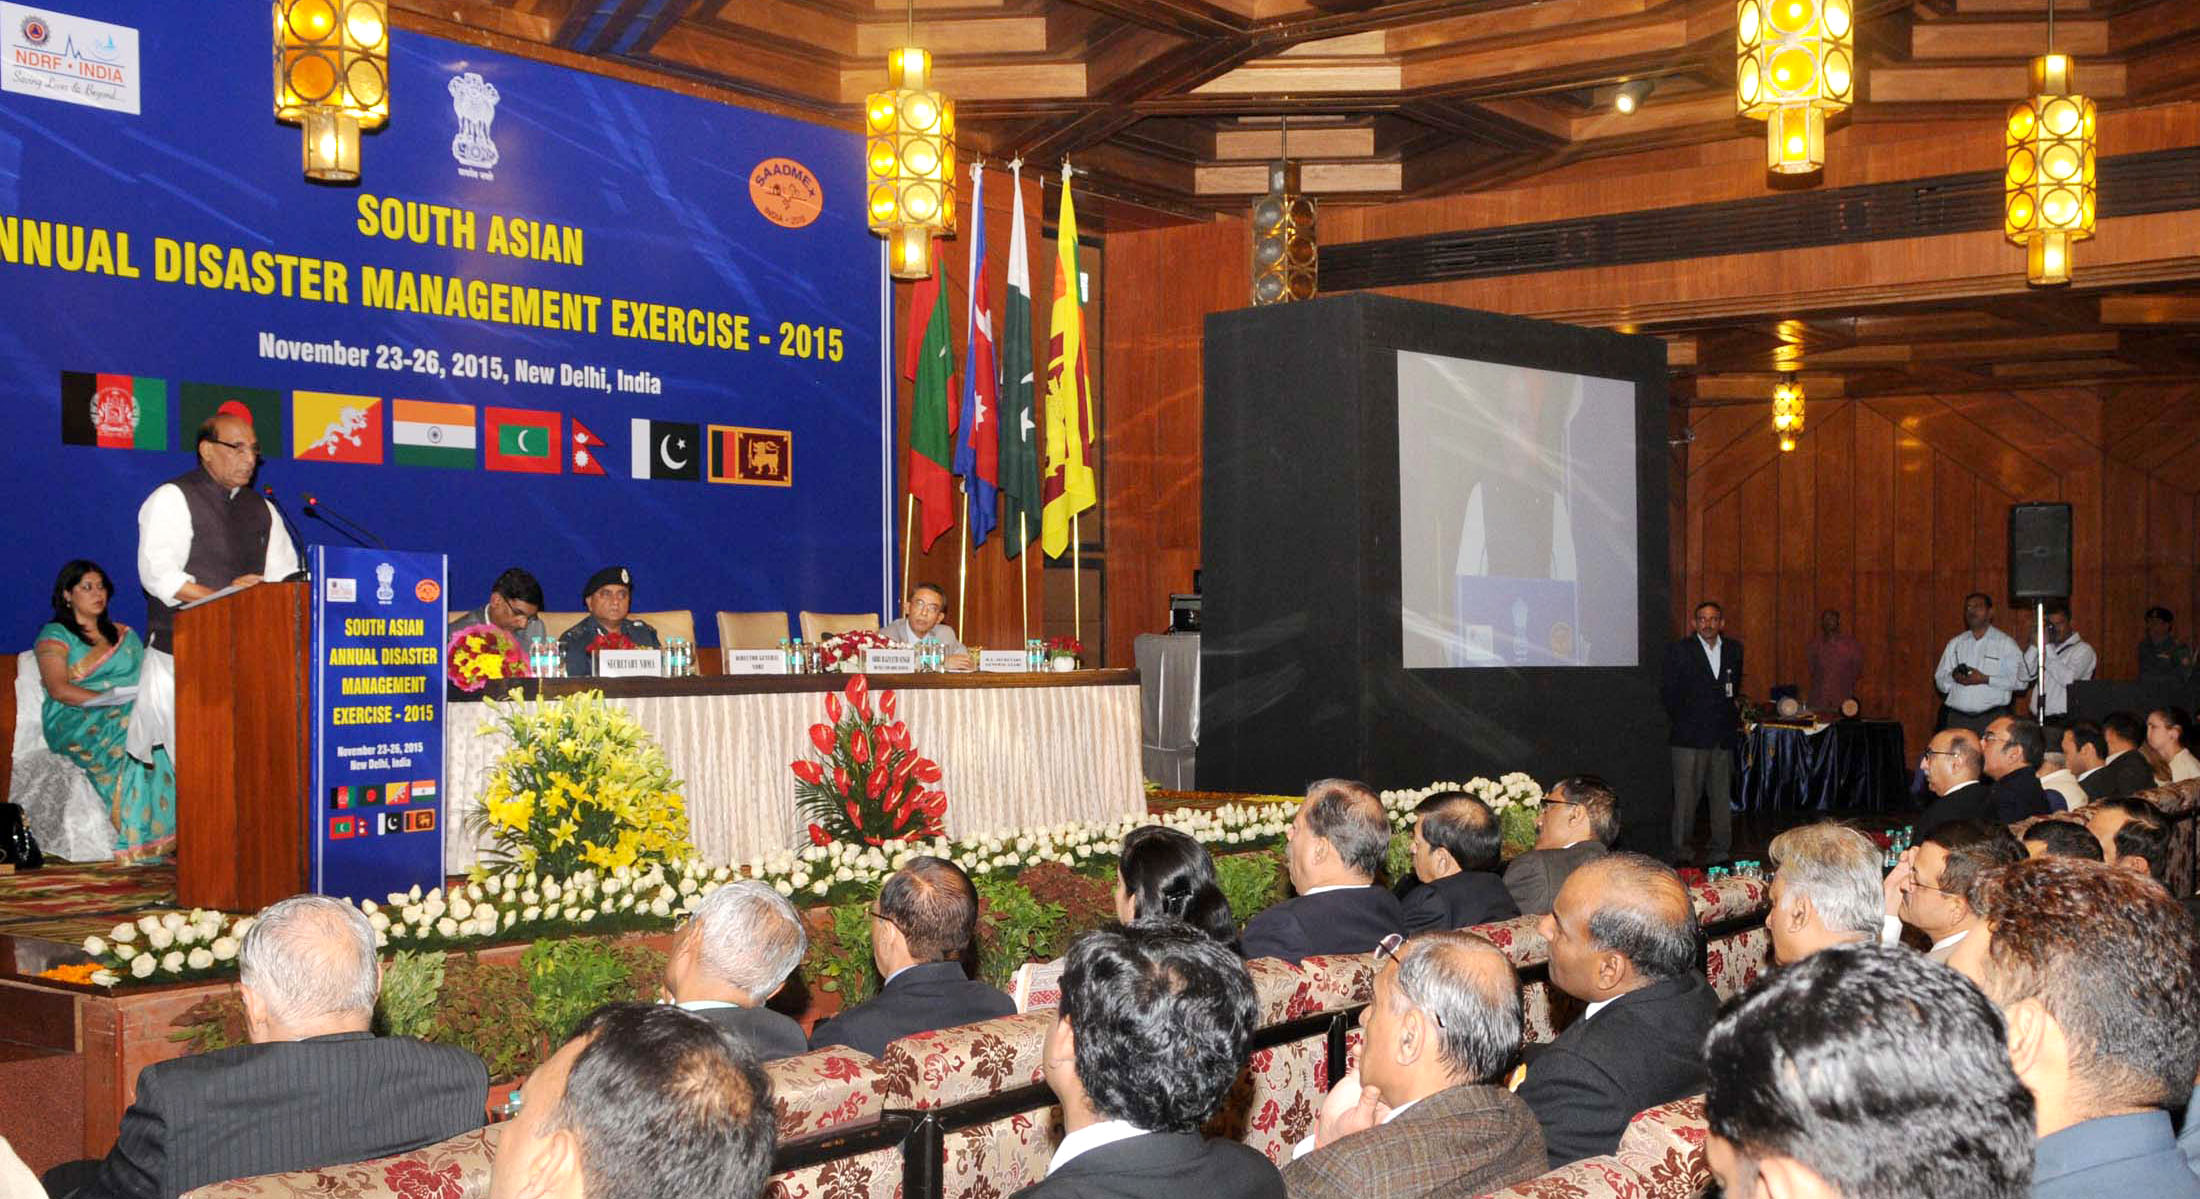 The Union Home Minister, Shri Rajnath Singh addressing at the concluding session of the first South Asia Annual Disaster Management Exercise (SAADMEx)-2015, in New Delhi on November 26, 2015. The Secretary General, SAARC, Shri Arjun Bahadur Thapa, the Member Secretary, NDMA, Shri R.K. Jain and the Director General, National Disaster Response Force (NDRF), Shri O.P. Singh are also seen.